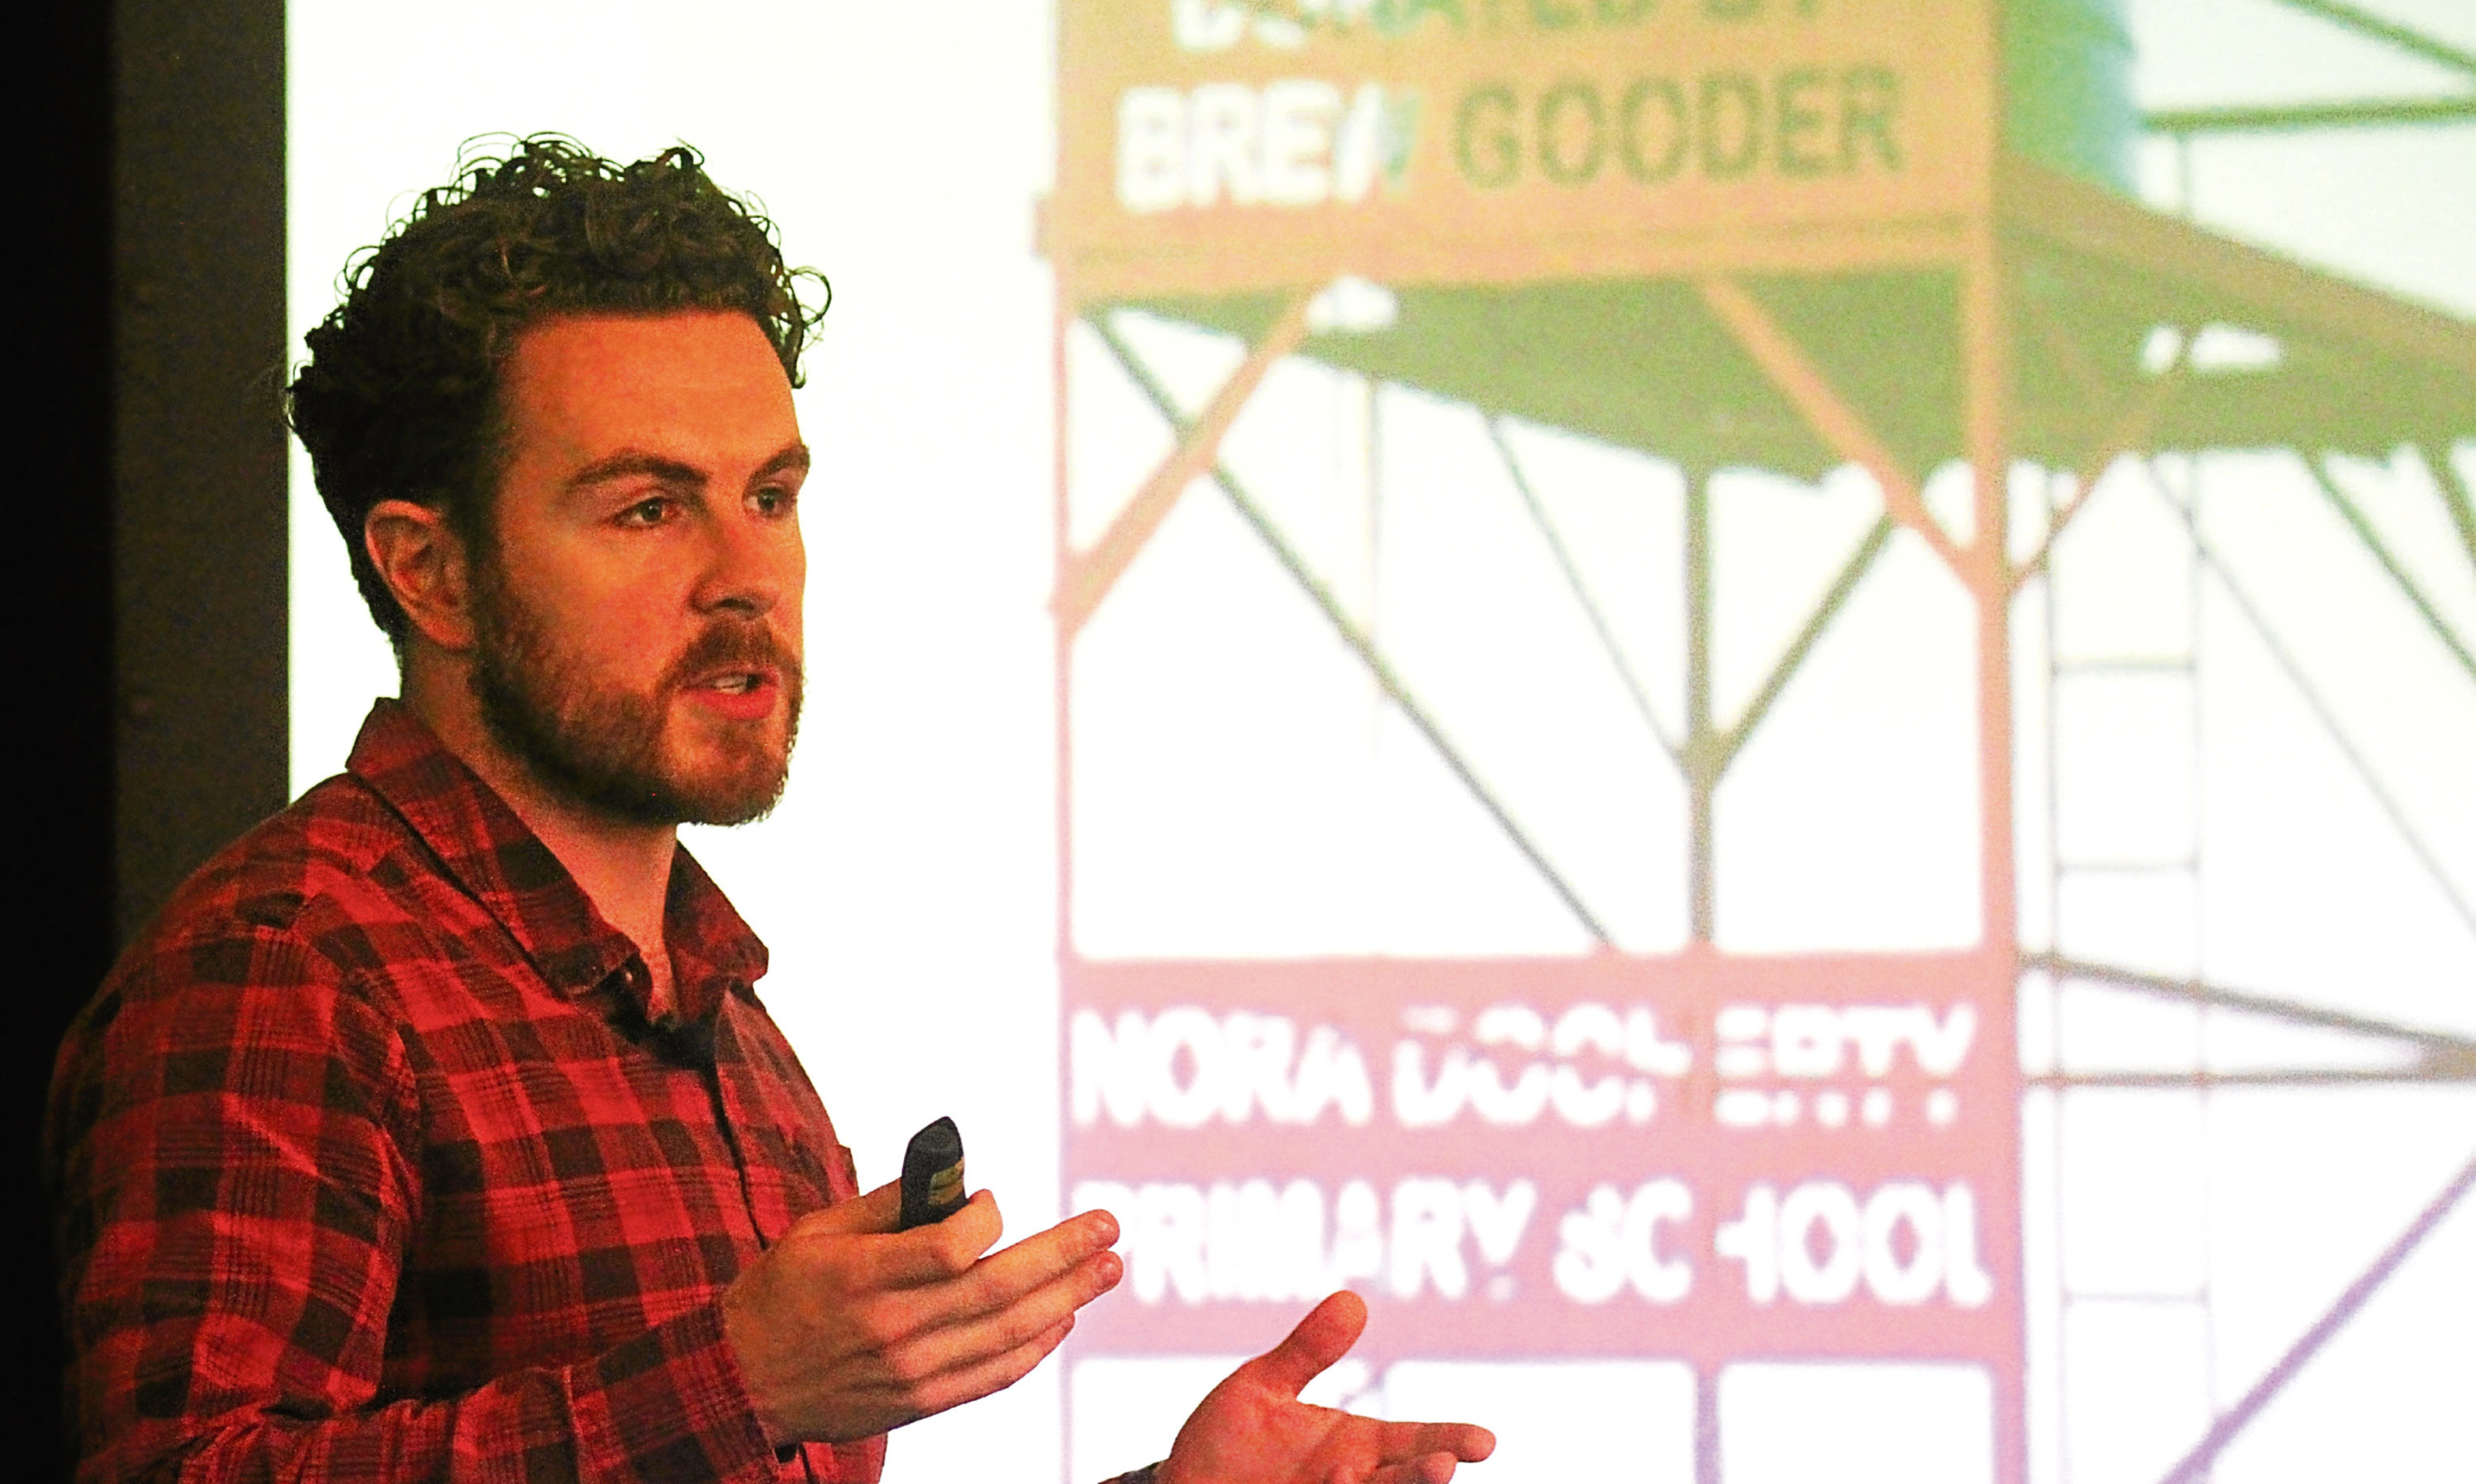 Alan Mahon of Brewgooder speaking at the business lunch